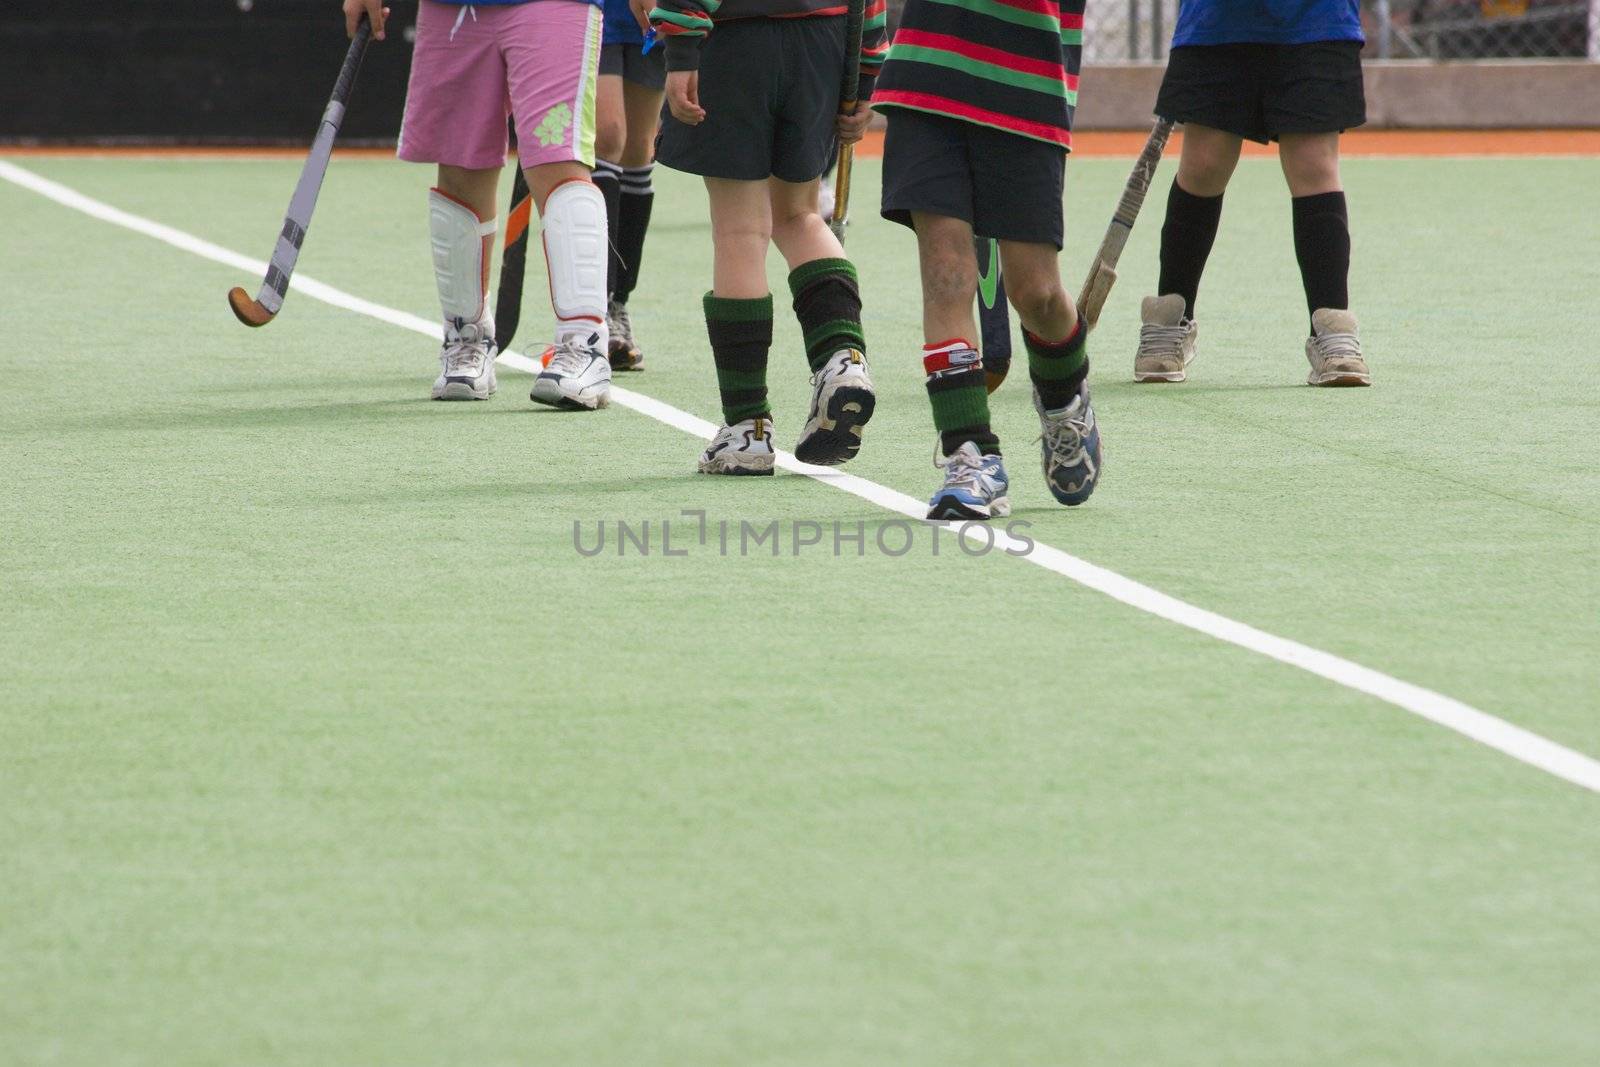 Kids standing on artificial turf playing hockey